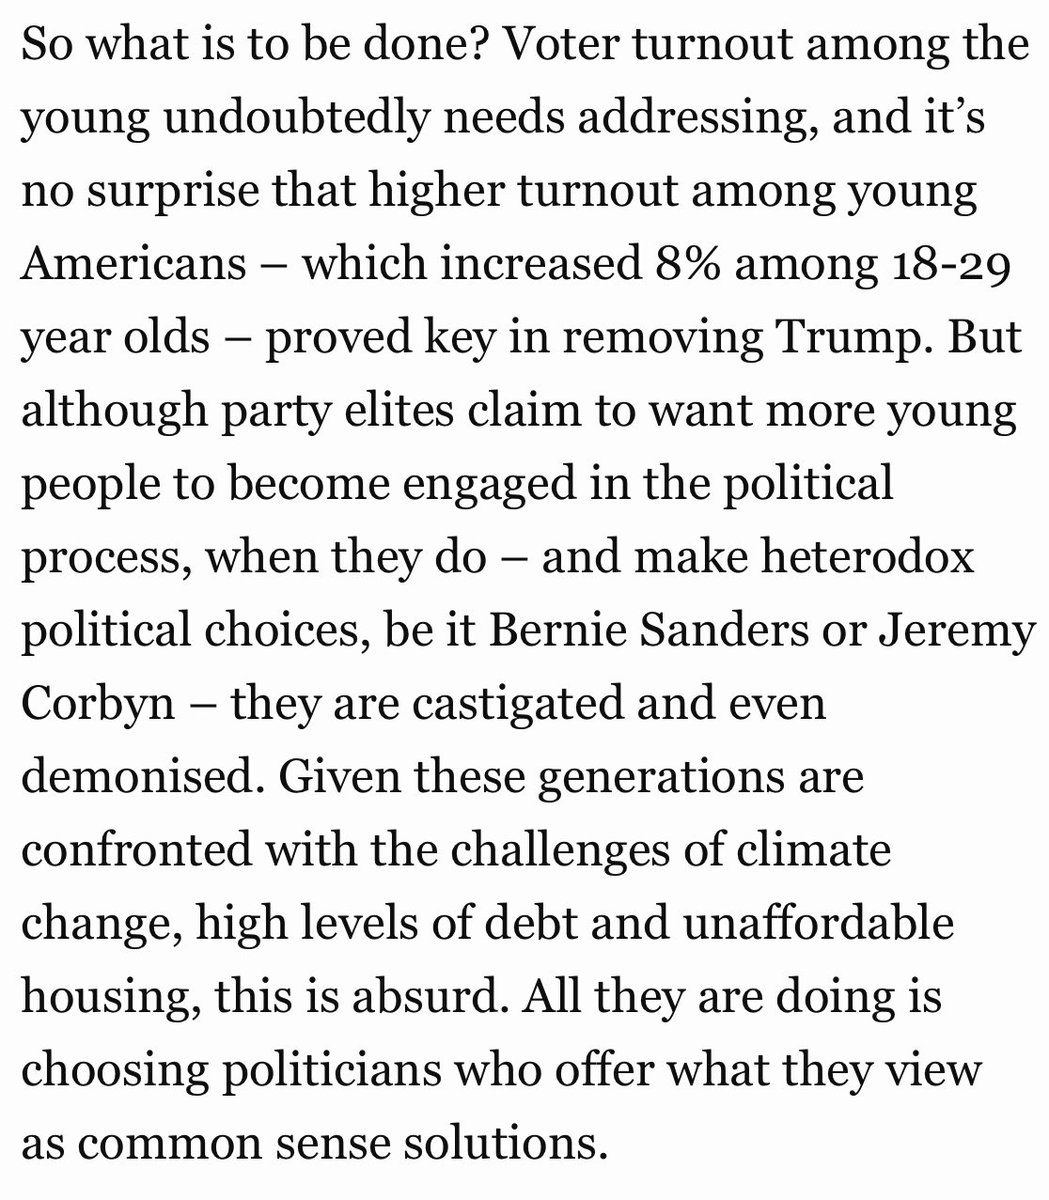 These same party elites want voters under 30 (increasingly under 45 is ‘young’) to engage with politics. That is until they disagree with their preferences.